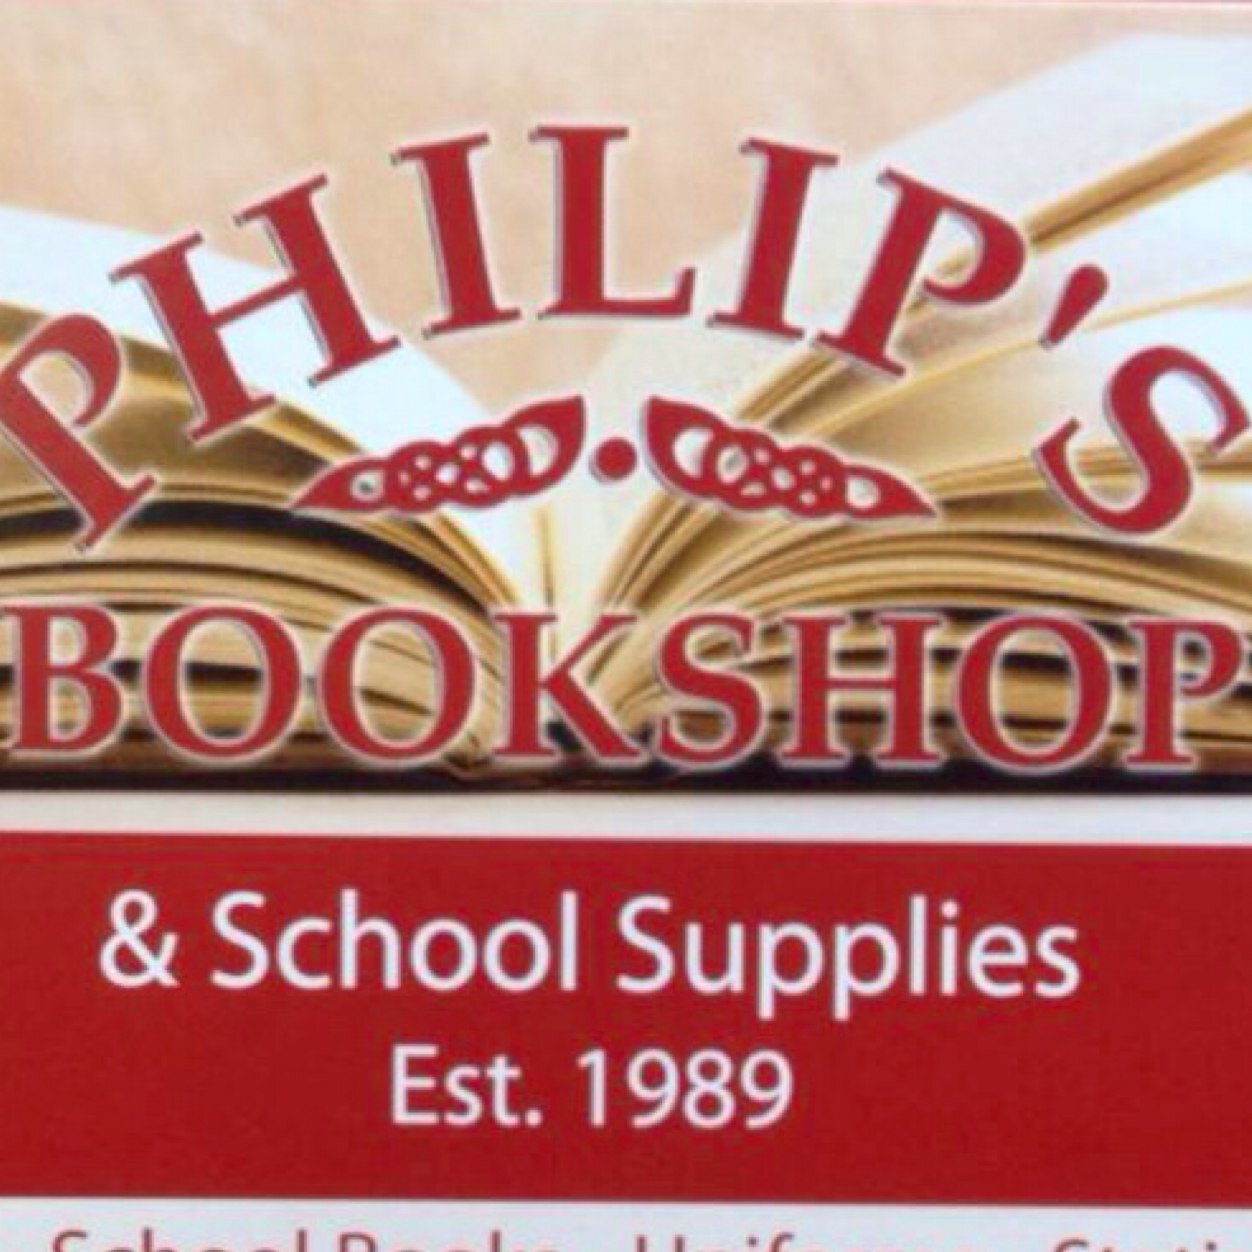 Family-run, independent bookshop specialising in bestselling books, gifts, crafts and cards. Proudly supporting local artists and writers since 1989.